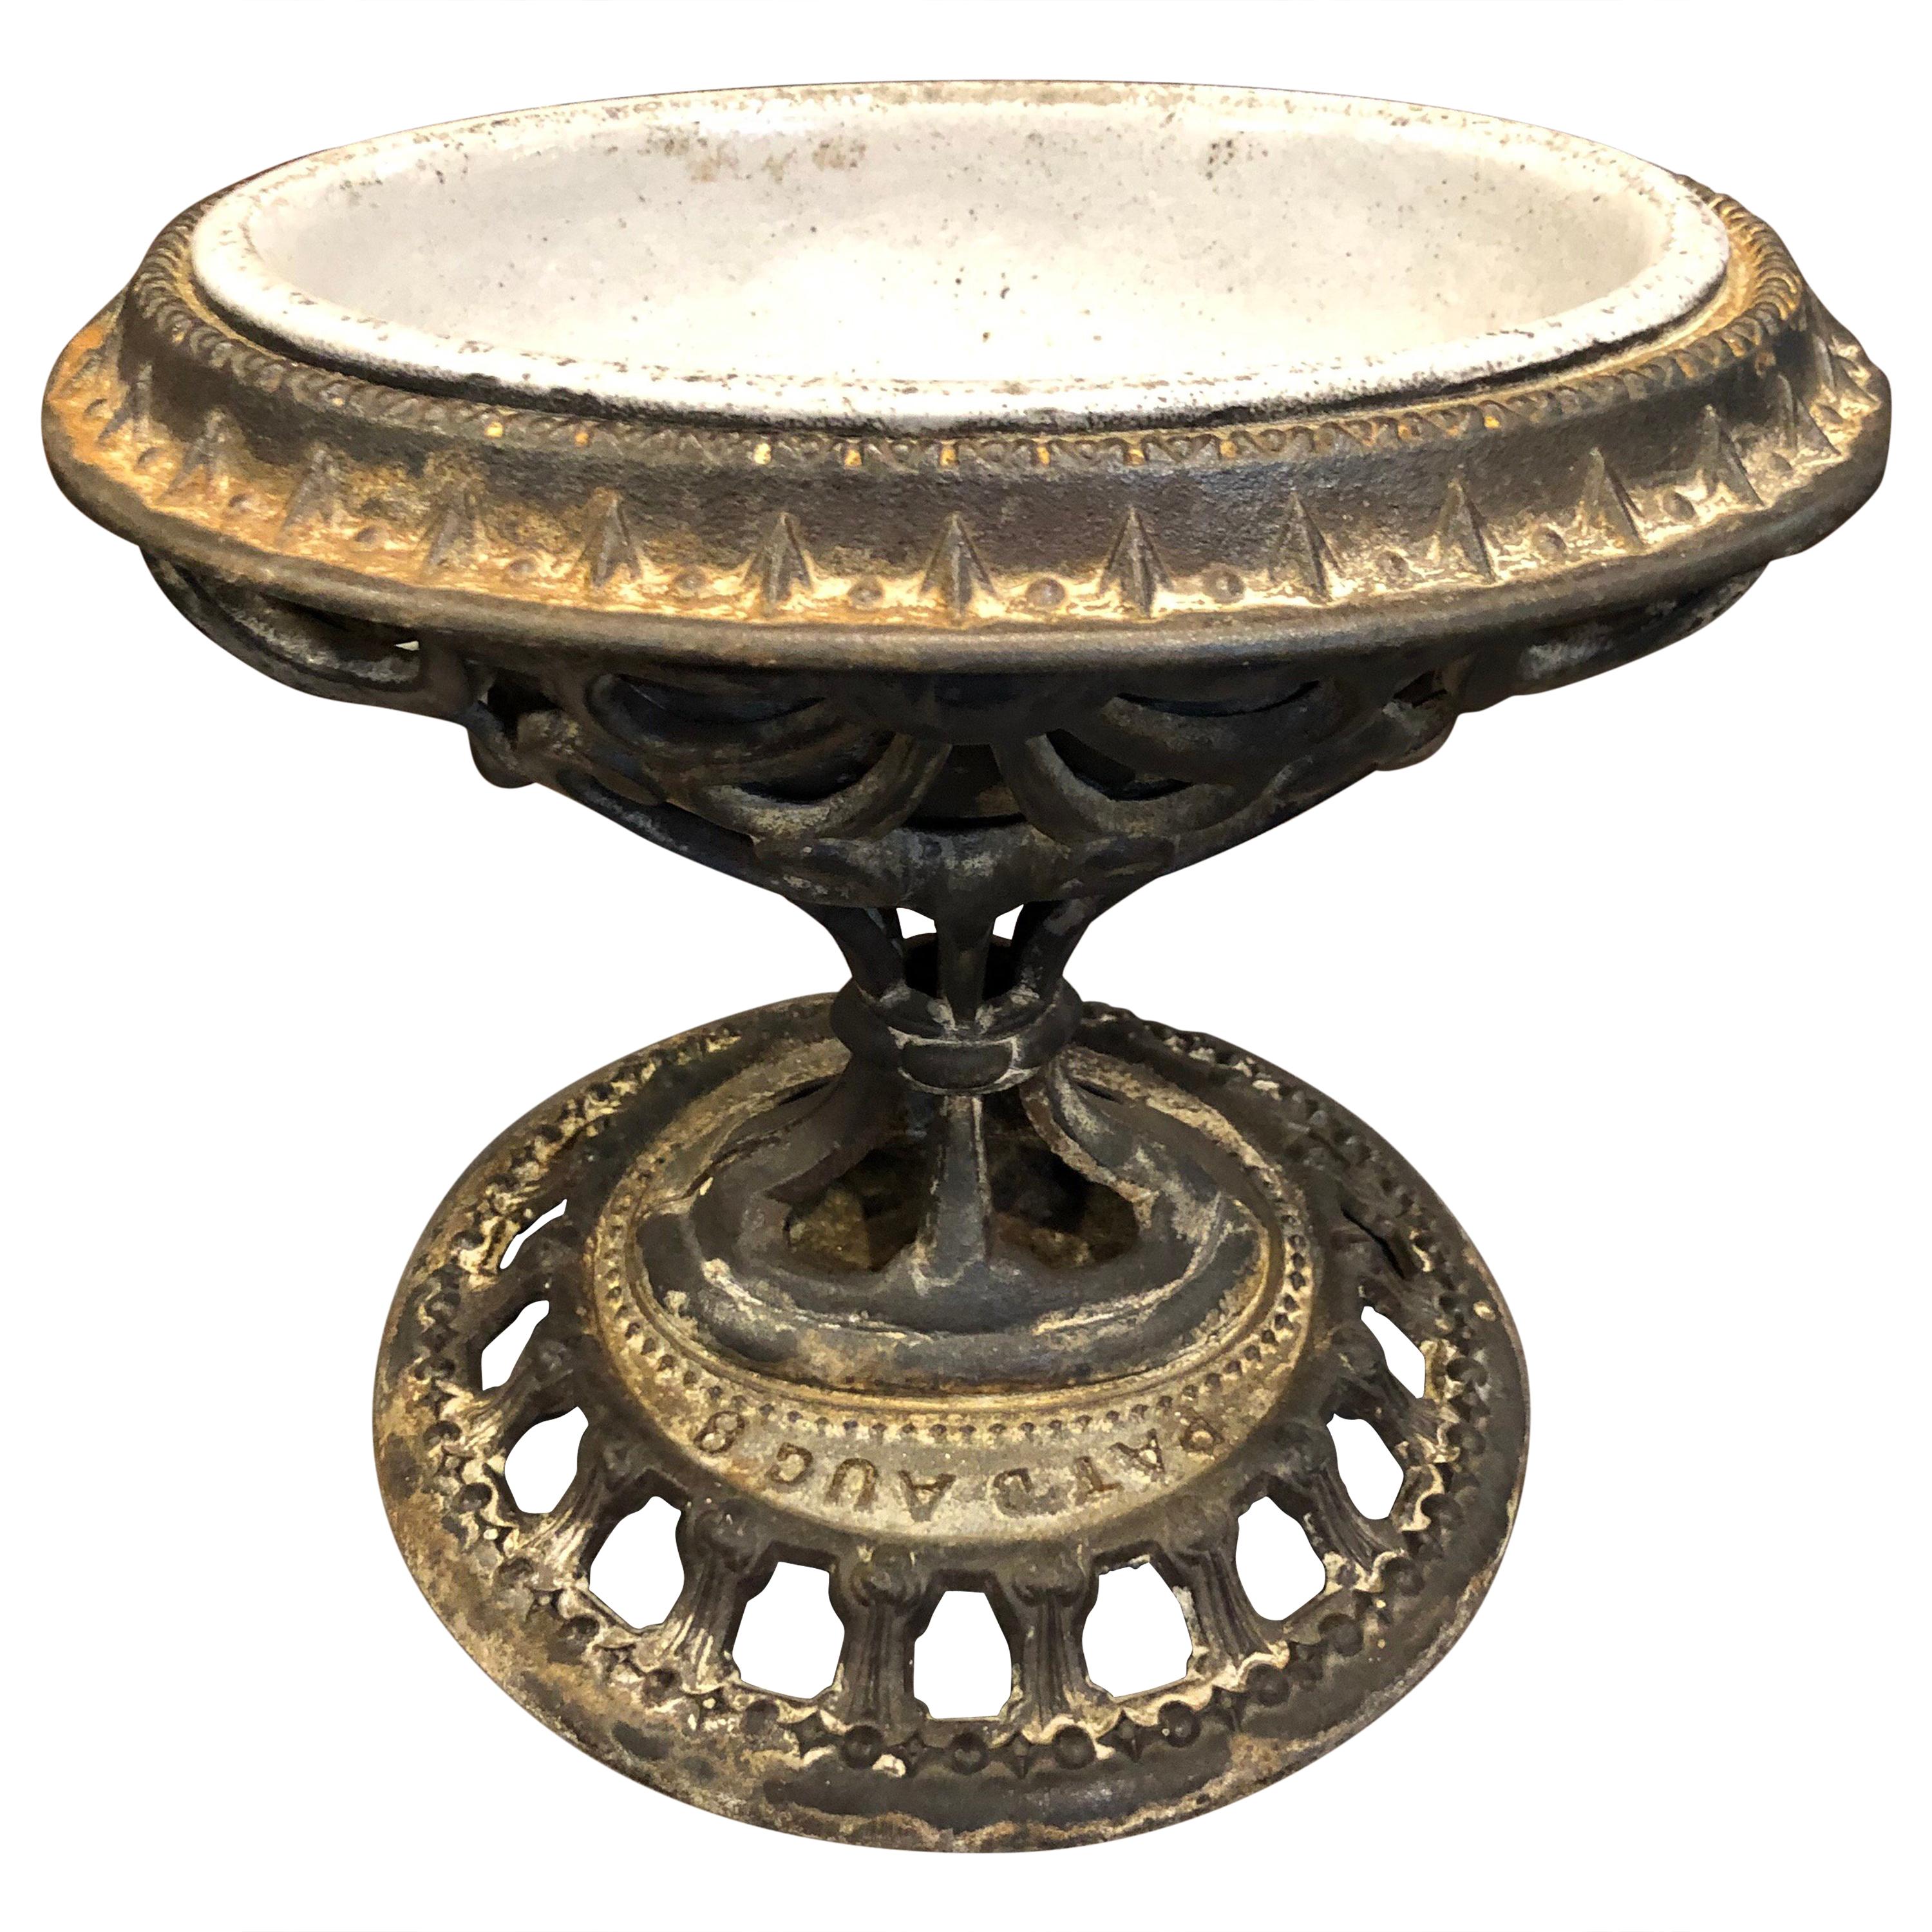 1865 Victorian Religious Holy Water Font or Cachepot